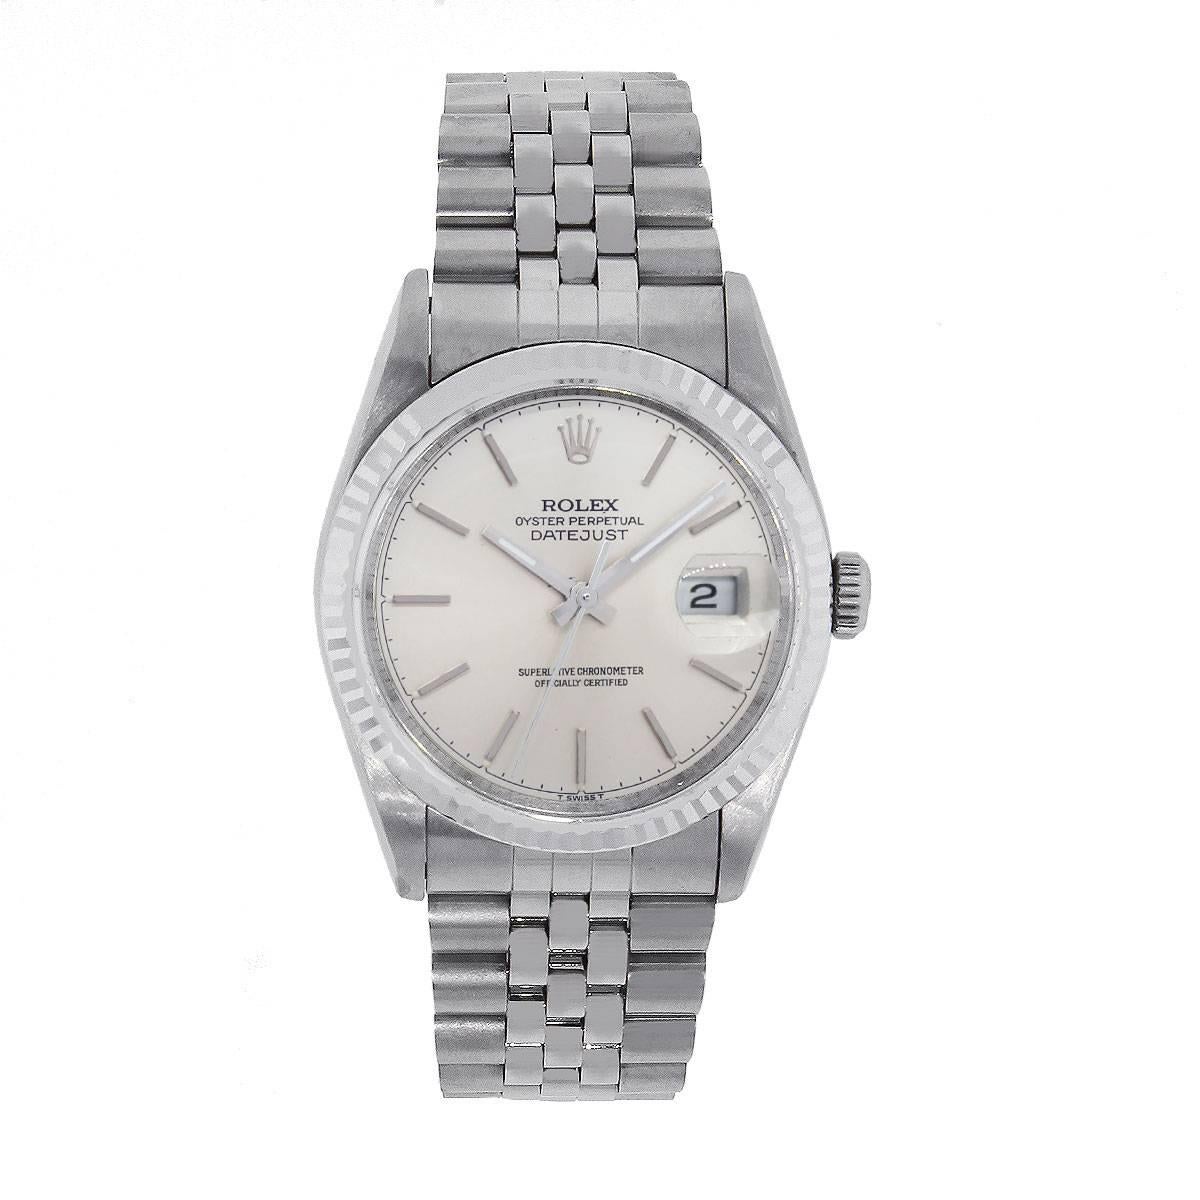 Brand: Rolex
MPN: Datejust
Model: 16234
Case Material: Stainless steel
Case Diameter: 36mm
Crystal: Scratch resistant sapphire
Bezel: Stainless steel engine turned bezel
Dial: Silvered stick dial with date window at the 3 o’clock position
Bracelet: